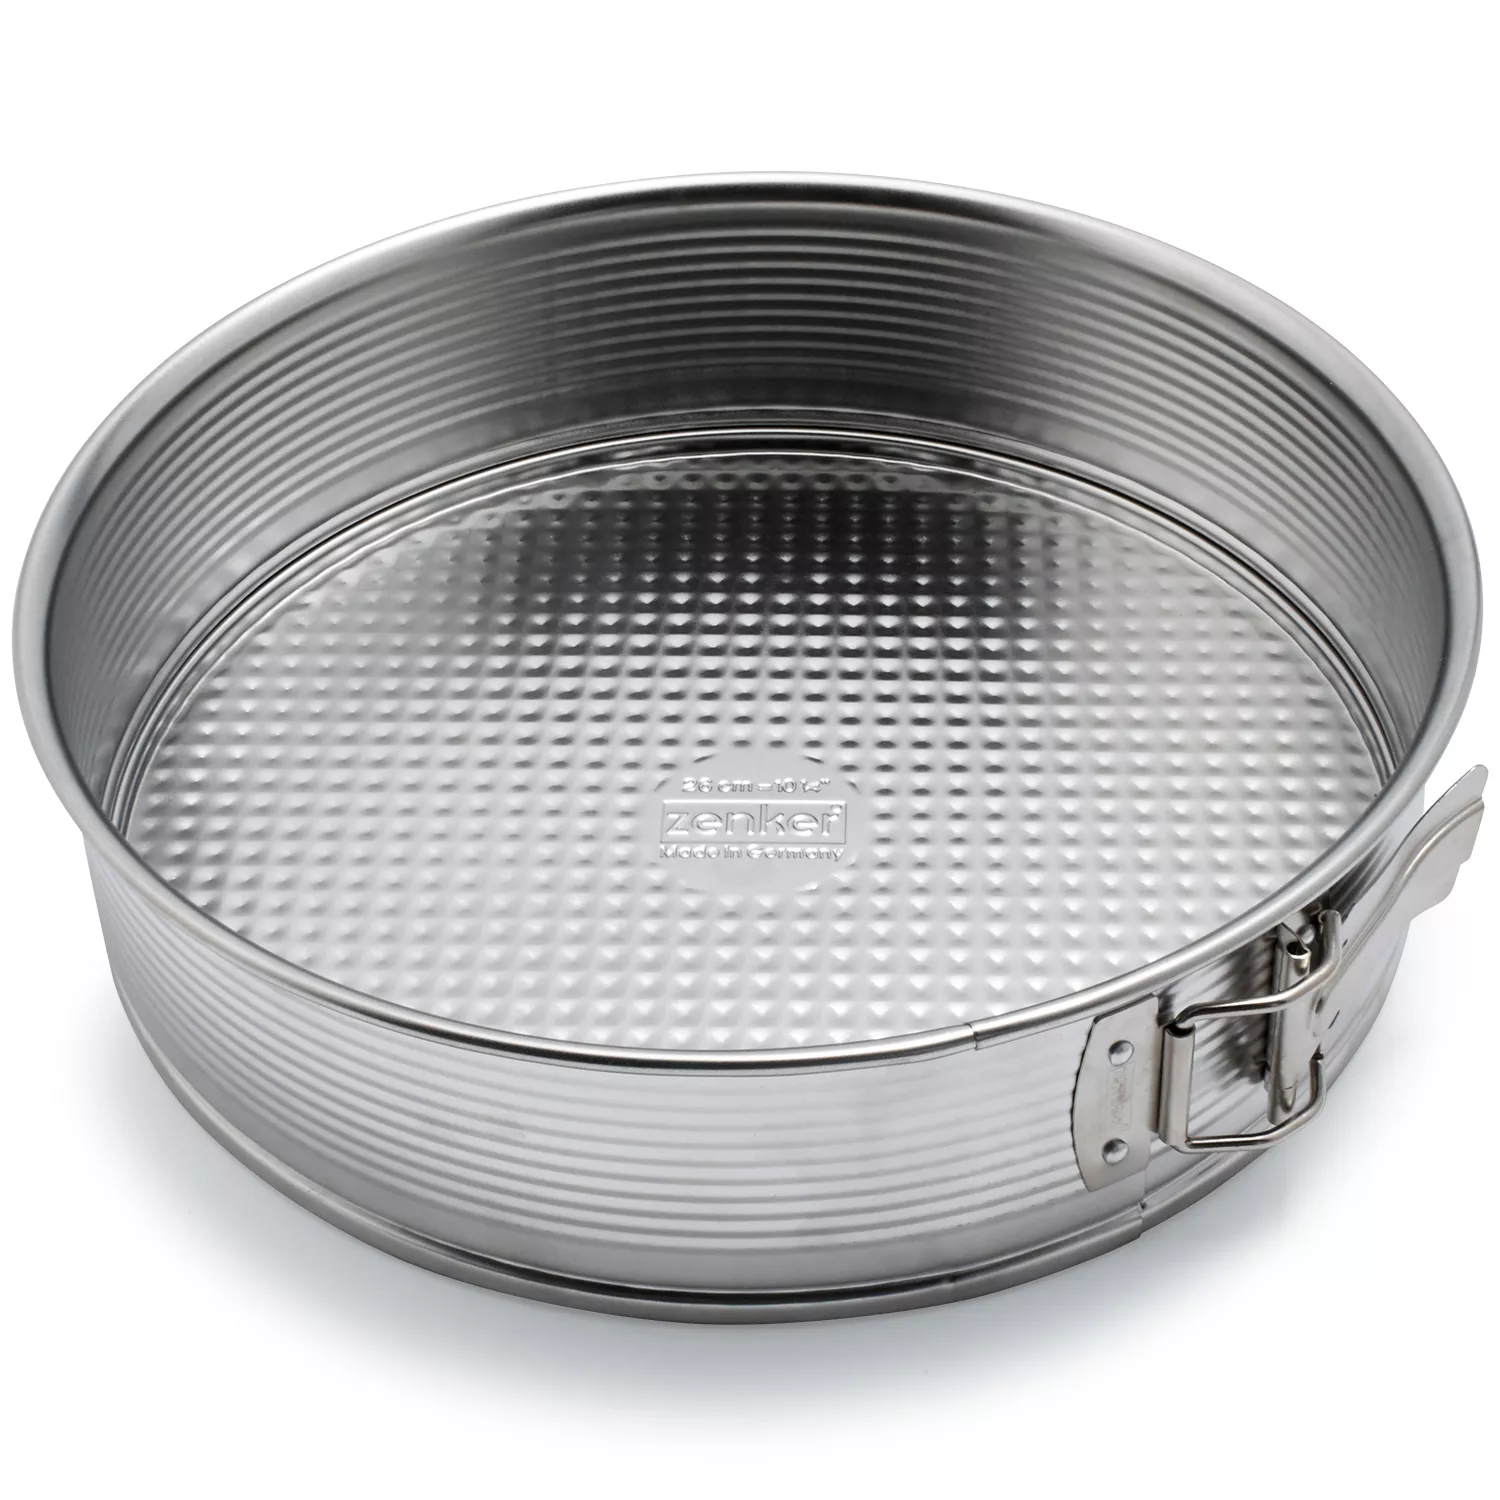 Cheesecake Pan Protector for 9,9.5 Inch Round Springform Pan